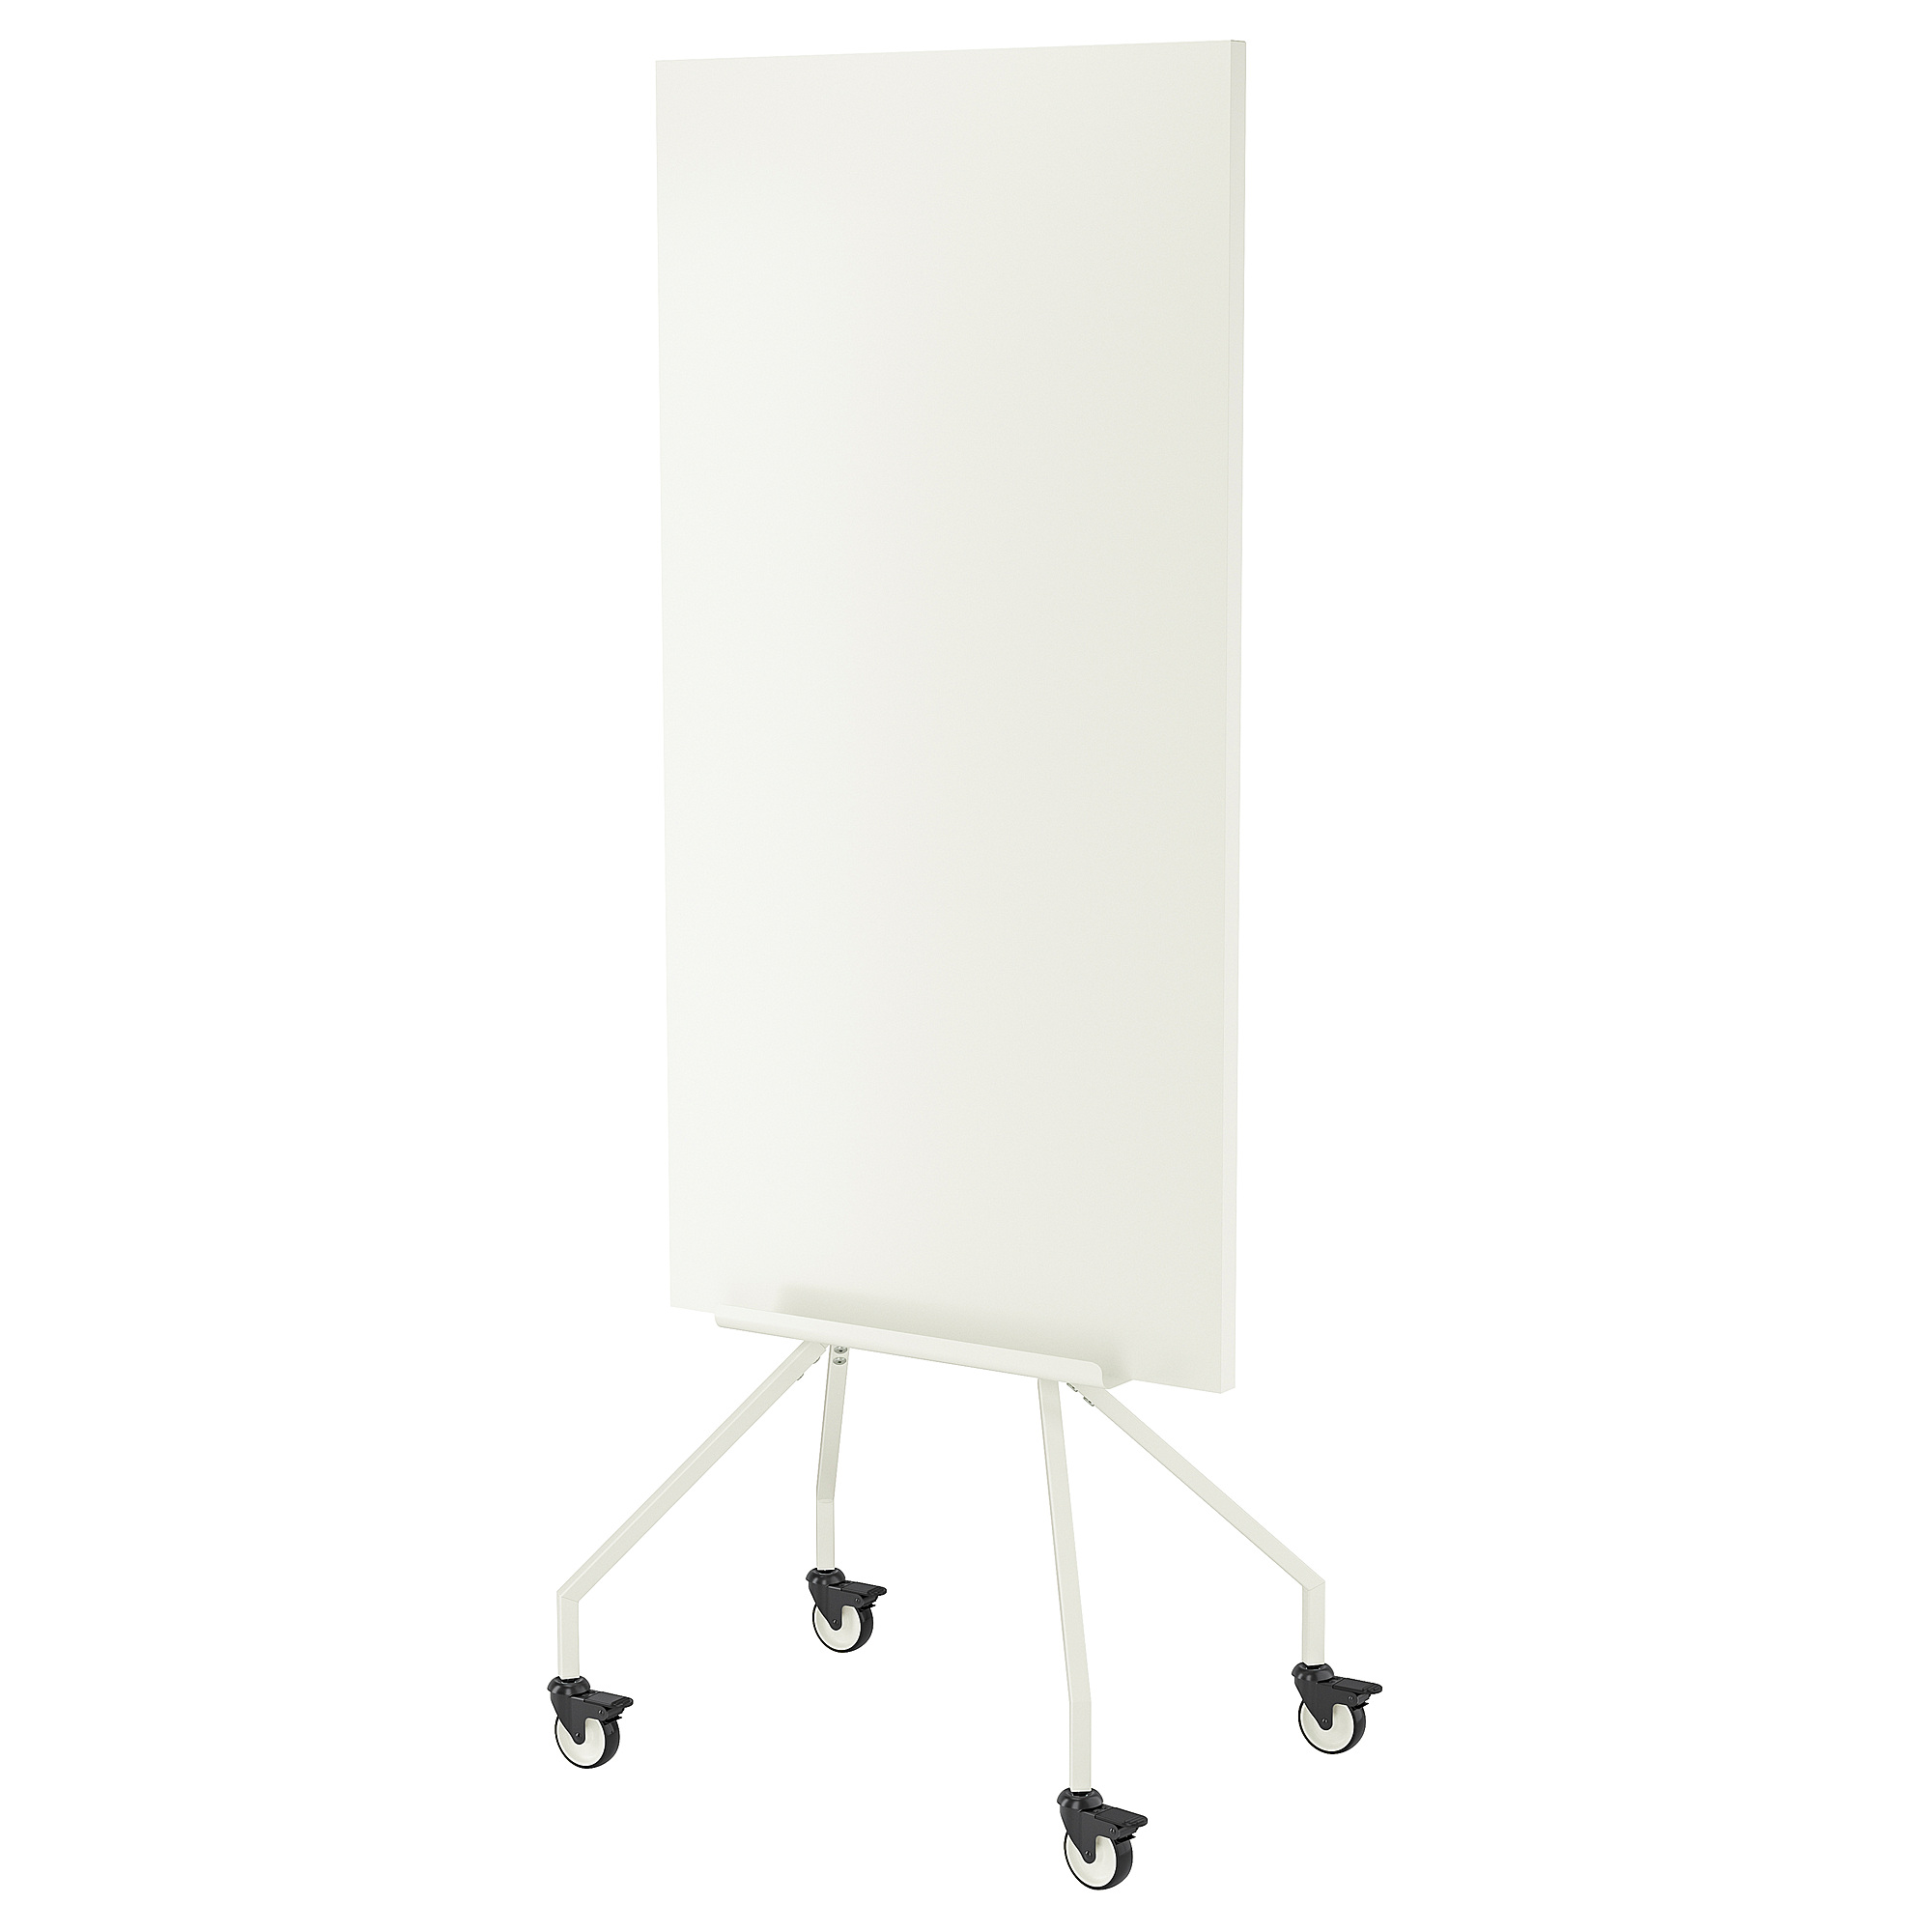 ELLOVEN whiteboard/noticeboard with castors